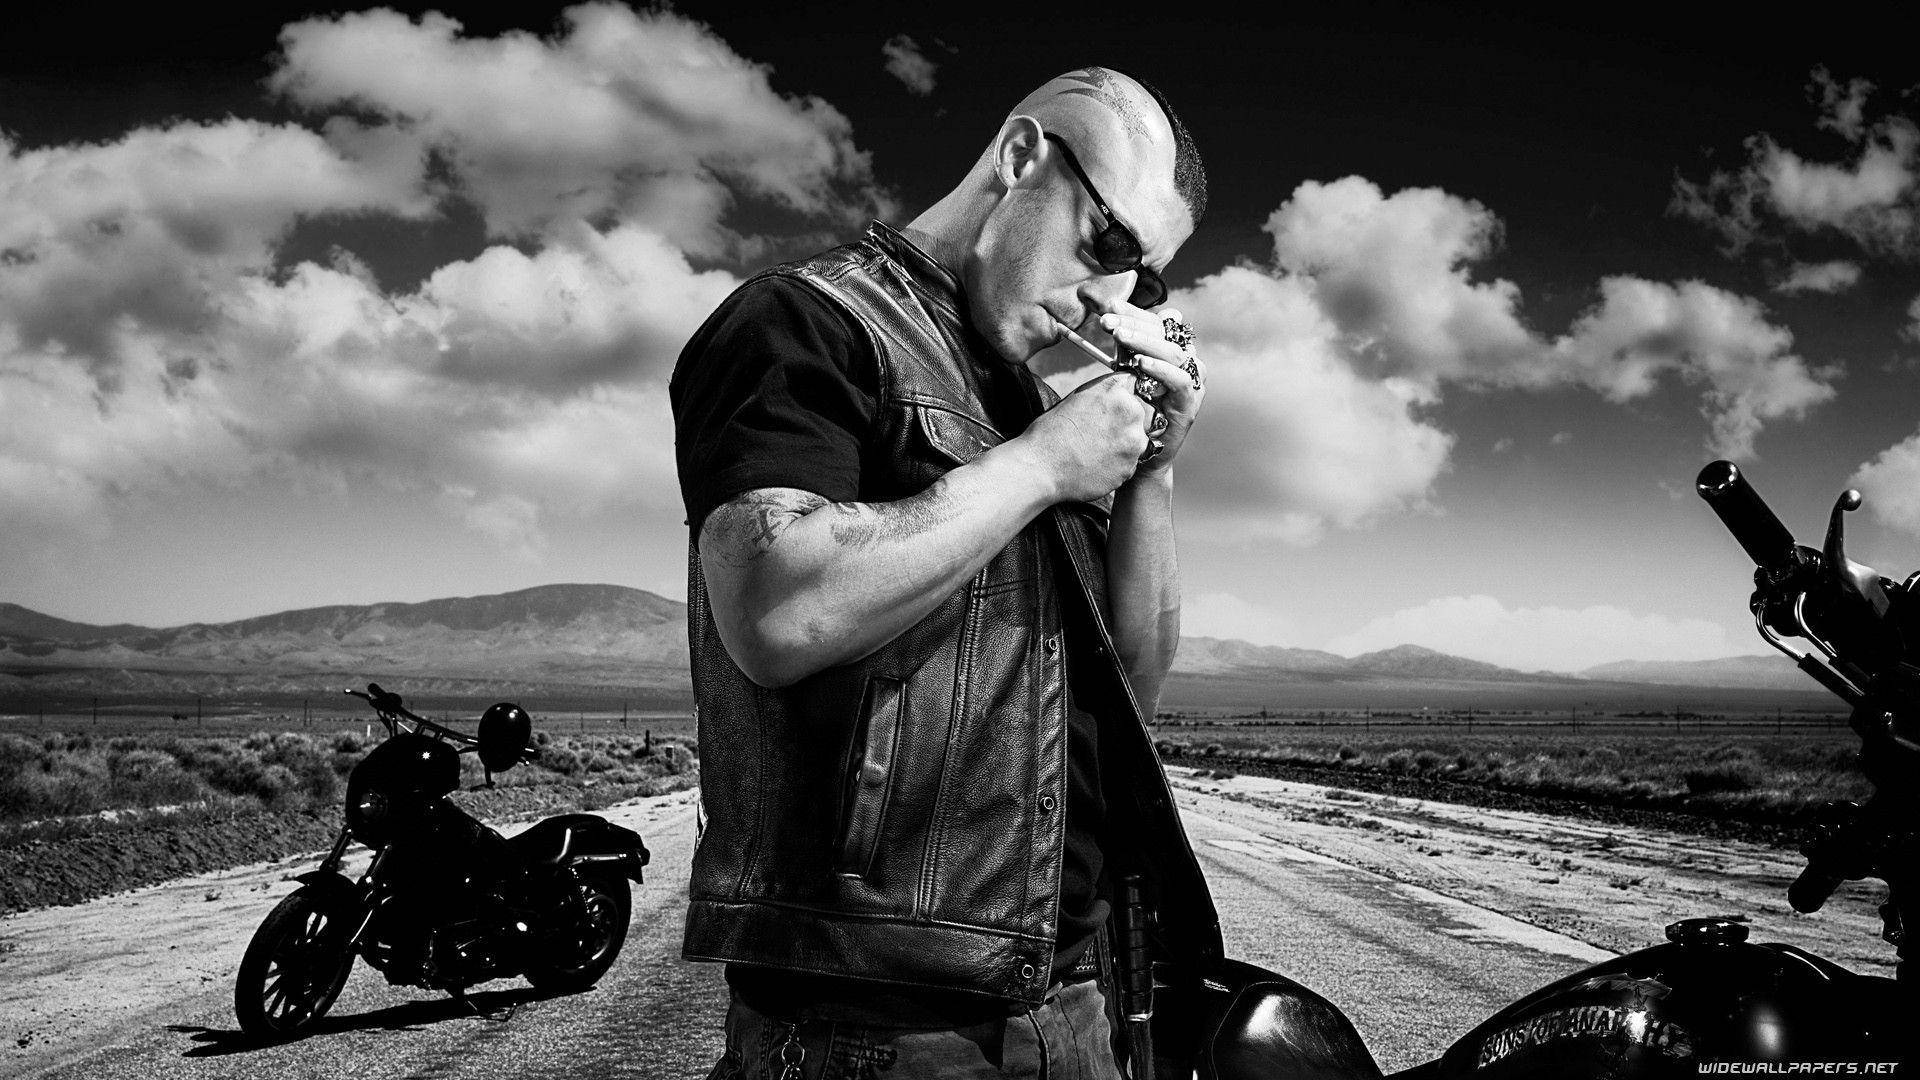 A Man Is Smoking A Cigarette On A Motorcycle